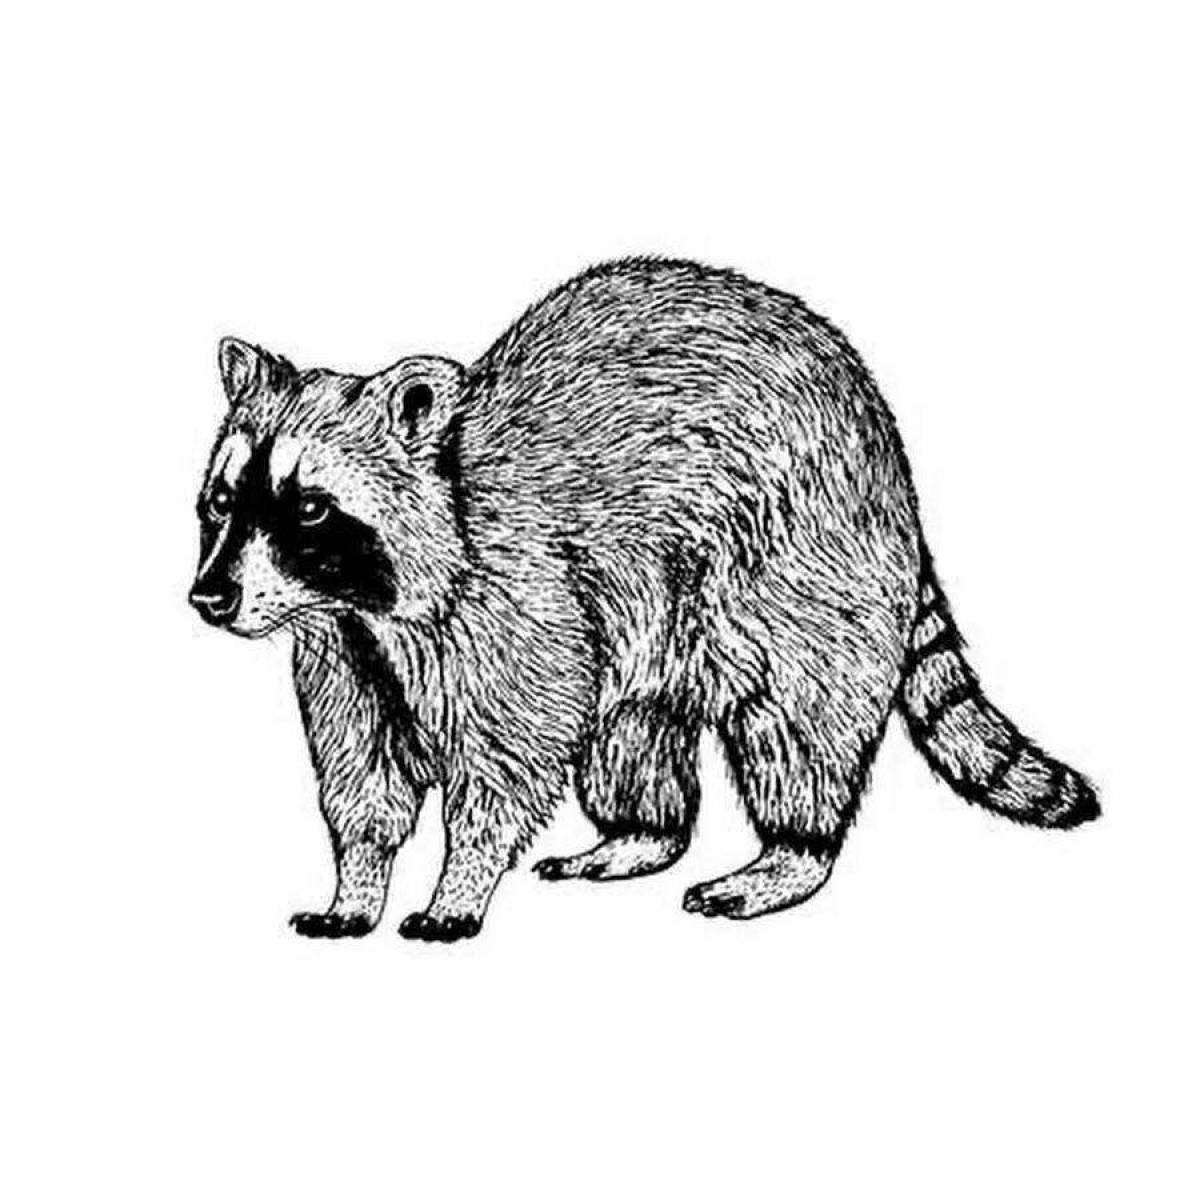 Coloring page dazzling raccoon